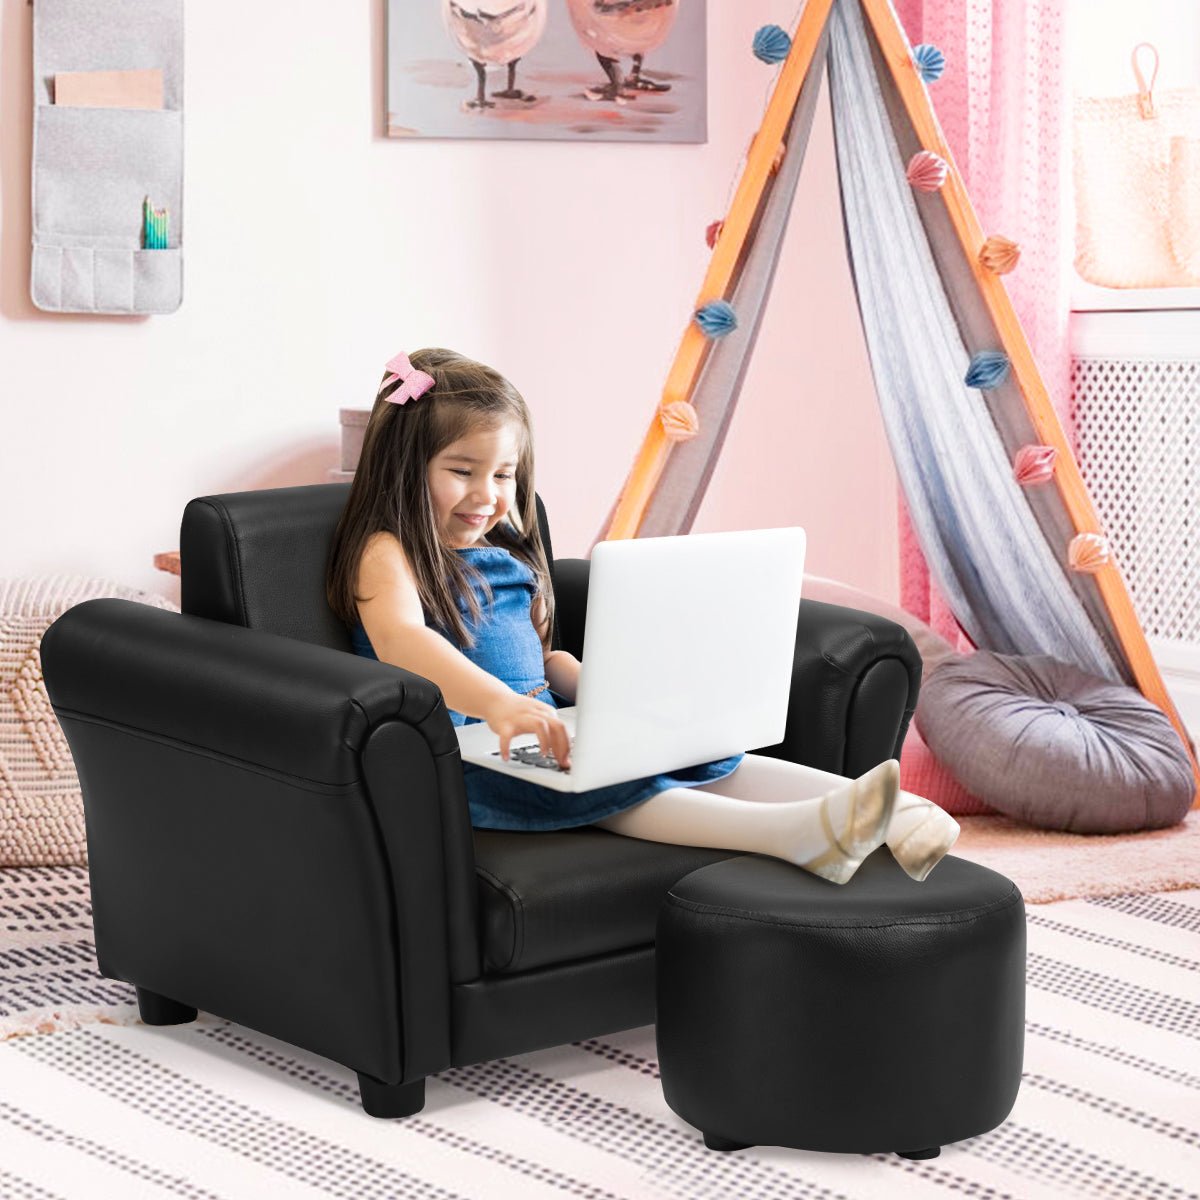 Ergonomic Black Sofa with Footstool - Comfortable Seating for Babies and Children